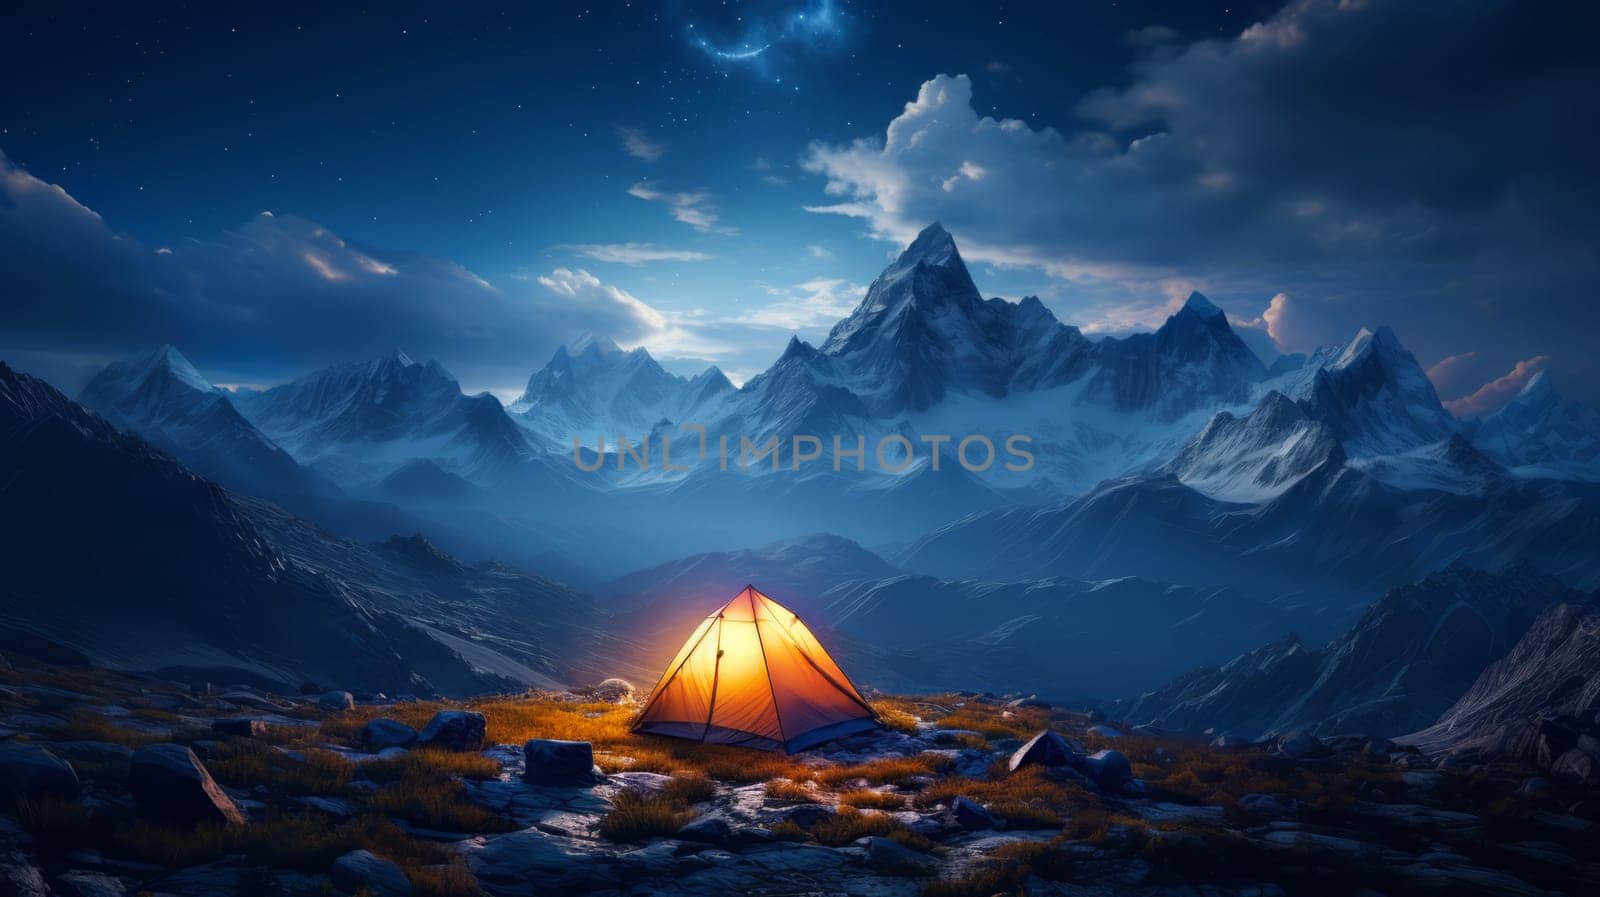 Tent in the mountains under the stars.